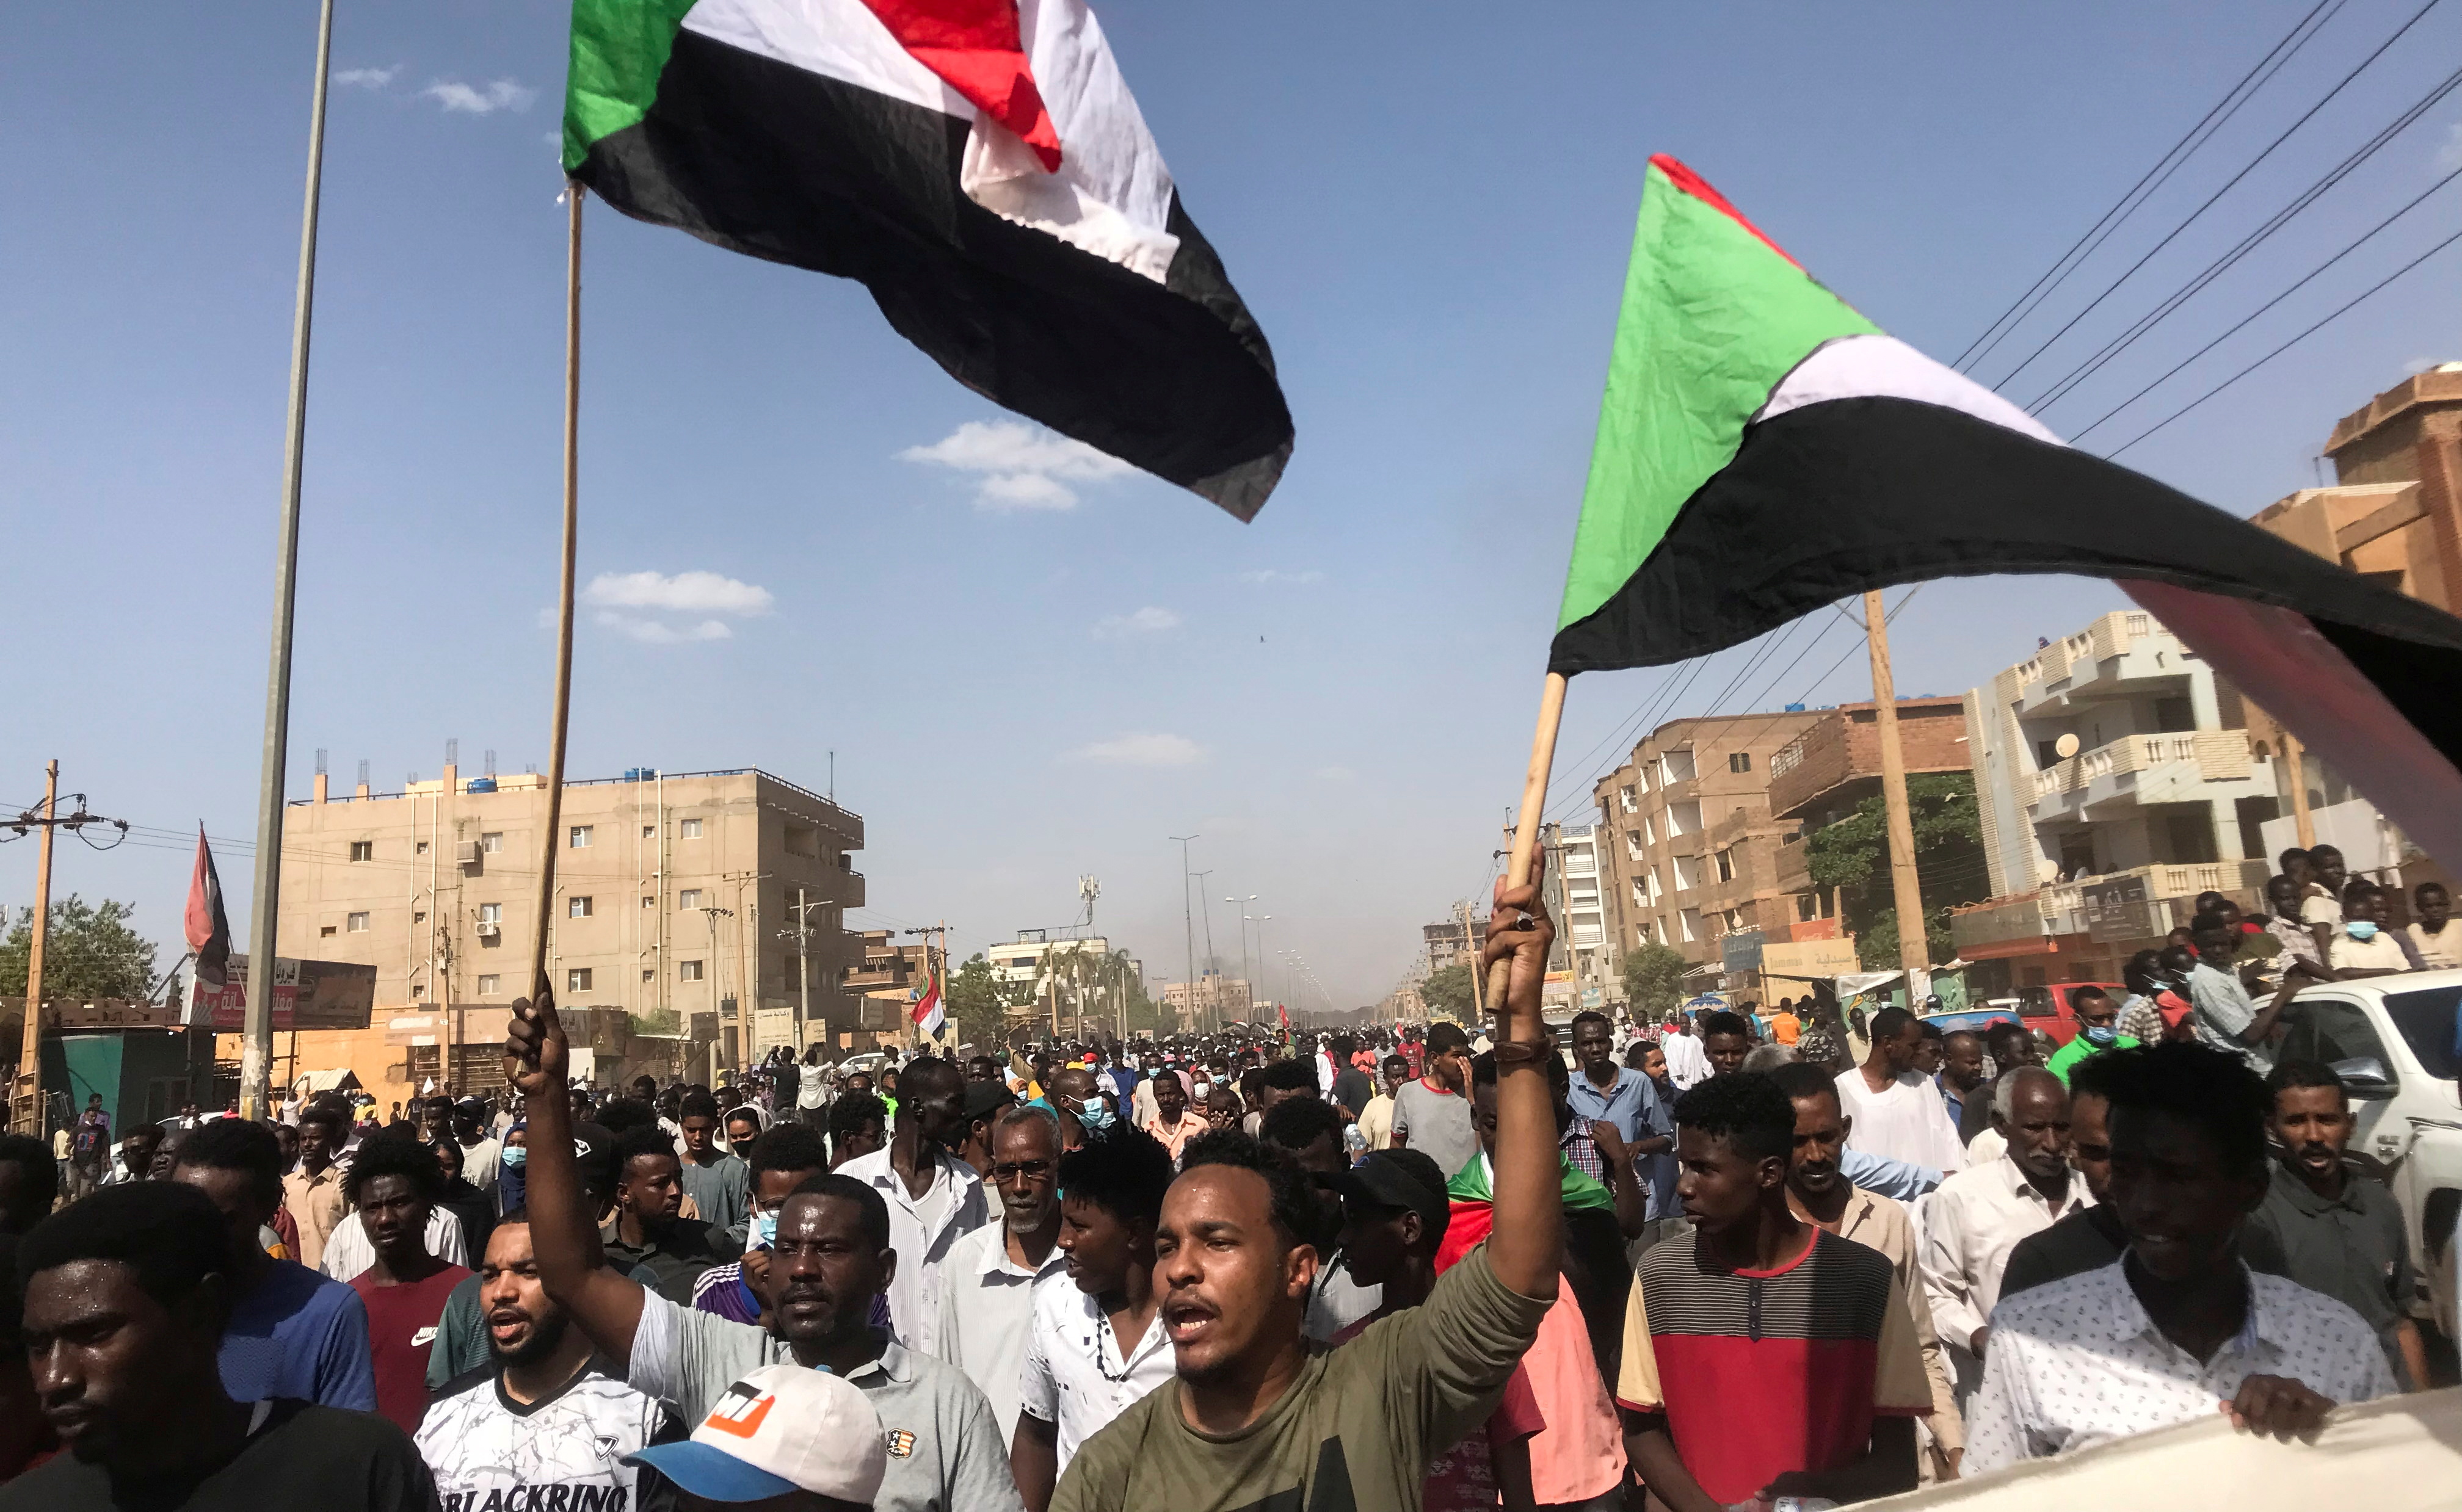 Protesters hold flags and chant slogans as they march against the Sudanese military's recent seizure of power and ousting of the civilian government, in the streets of the capital Khartoum, Sudan October 30, 2021. REUTERS/Mohamed Nureldin/File Photo